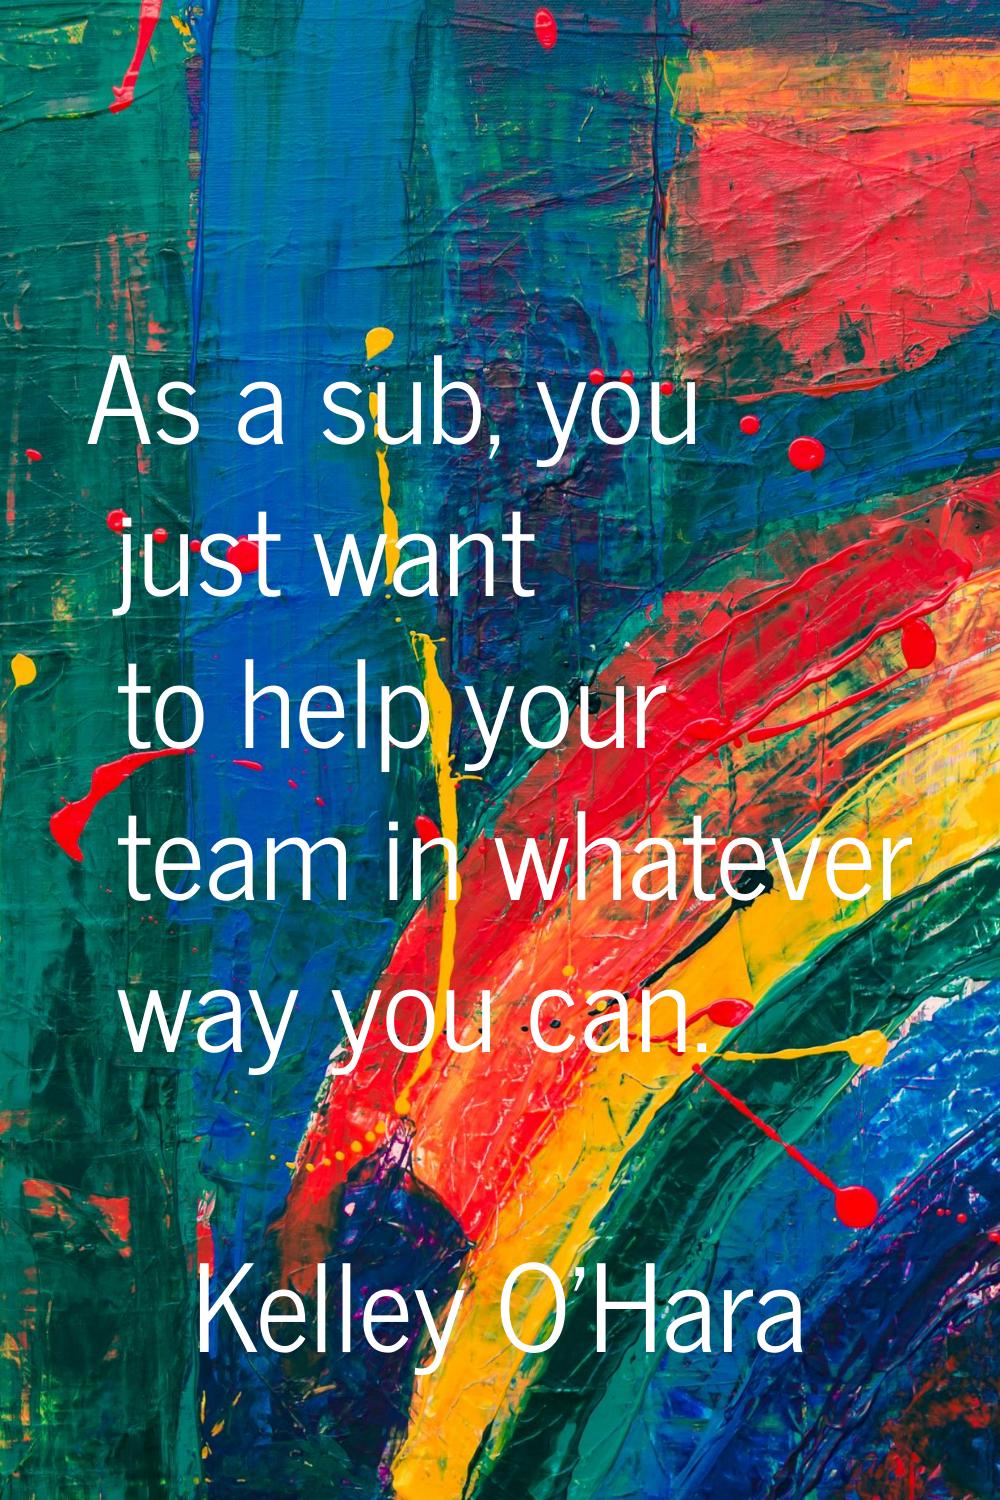 As a sub, you just want to help your team in whatever way you can.